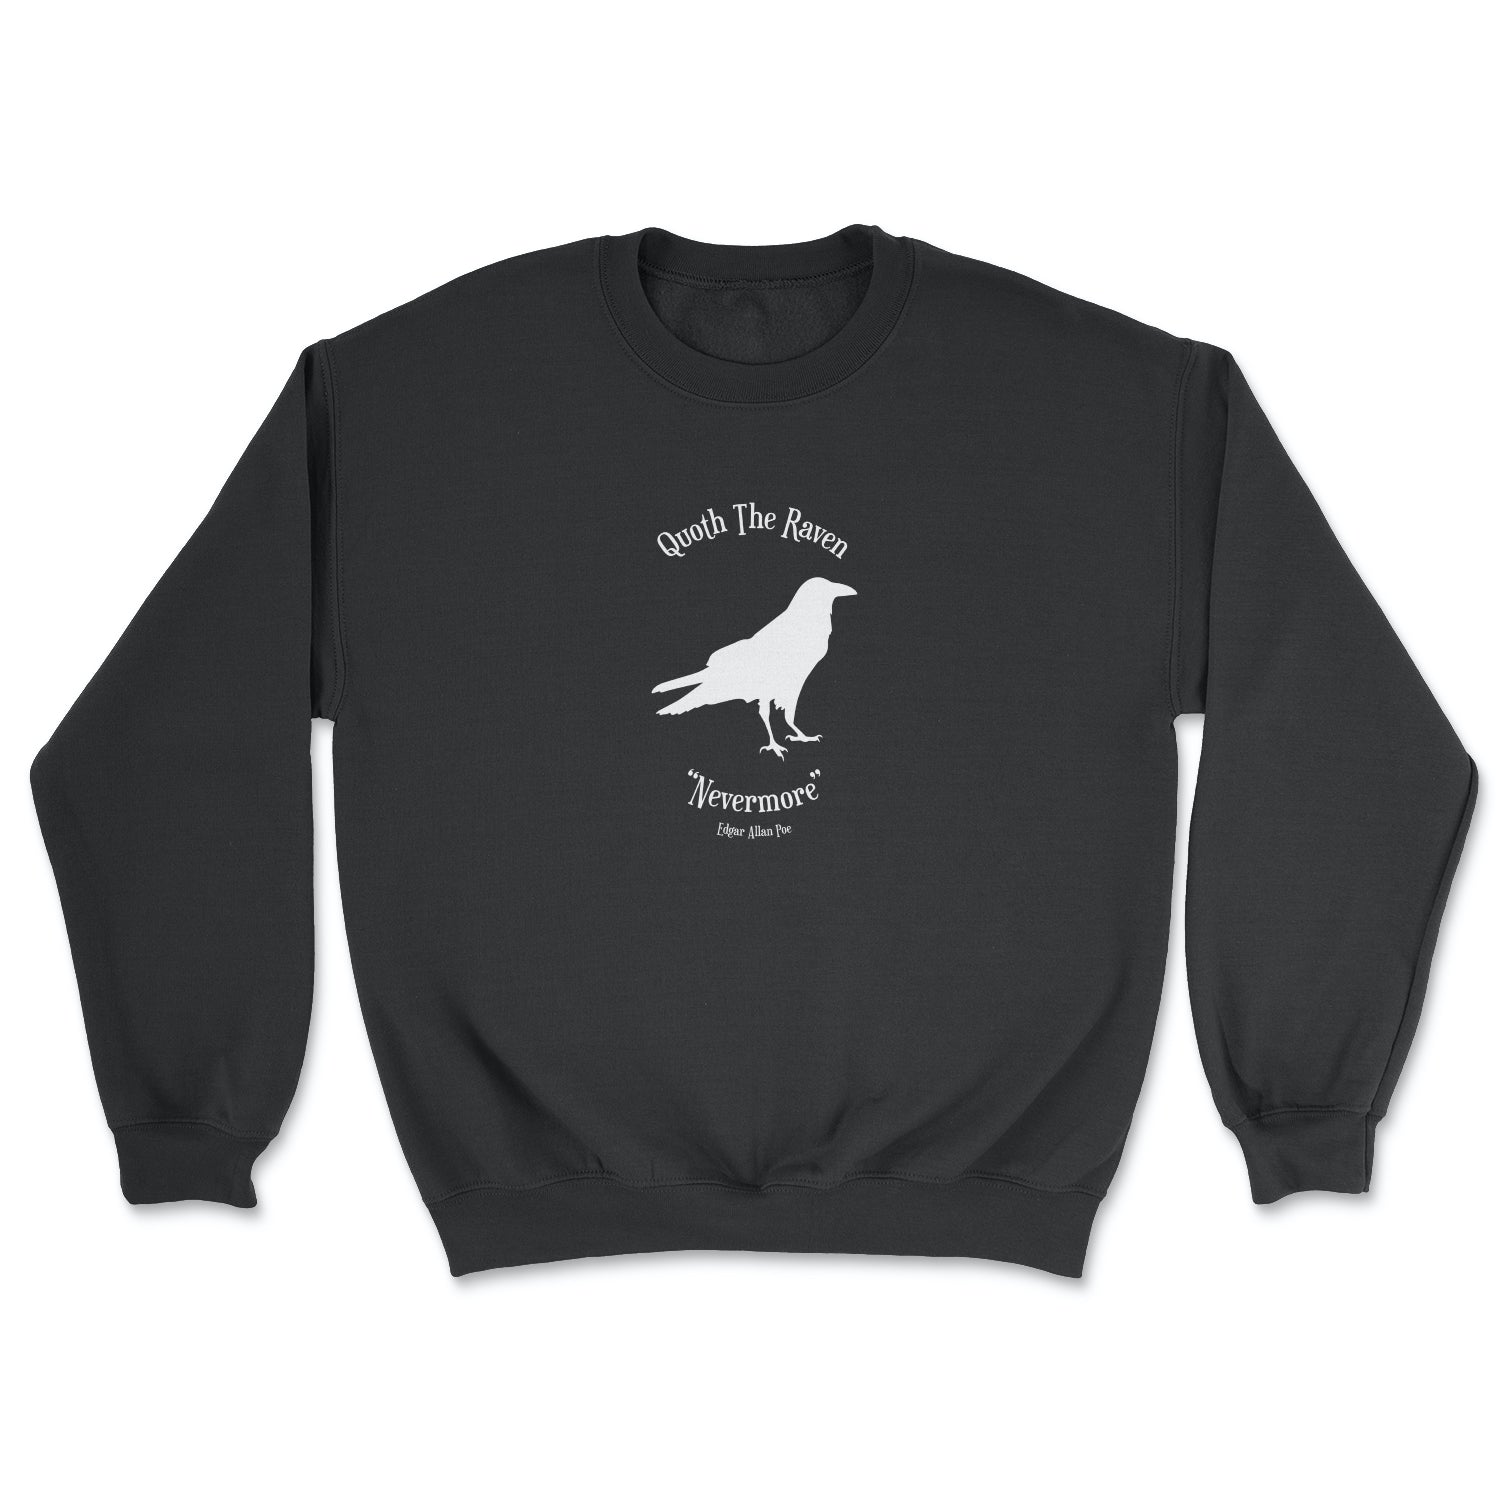 This black crewneck sweater contains a white silhouette of a raven in the centre of the graphic.  At the top are the words "Quoth the Raven" and at the bottom "Nevermore."  Edgar Allan Poe. 